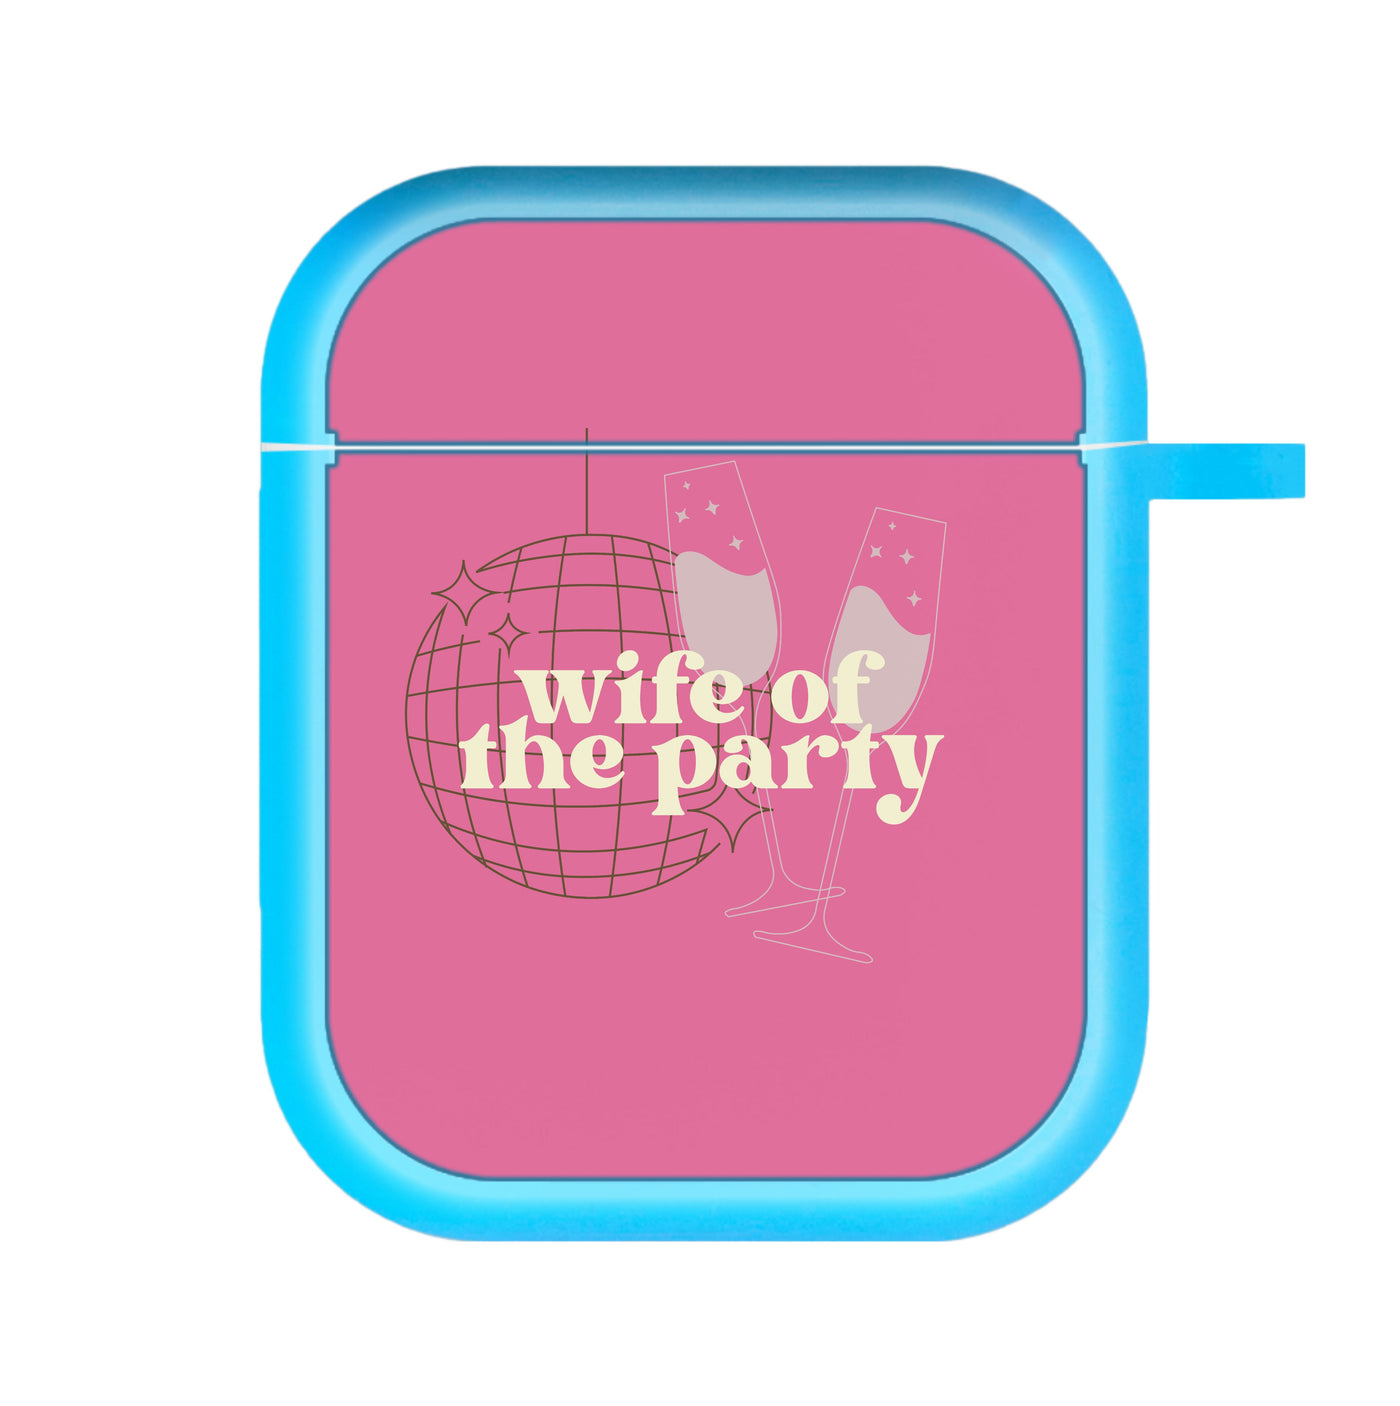 Wife Of The Party - Bridal AirPods Case